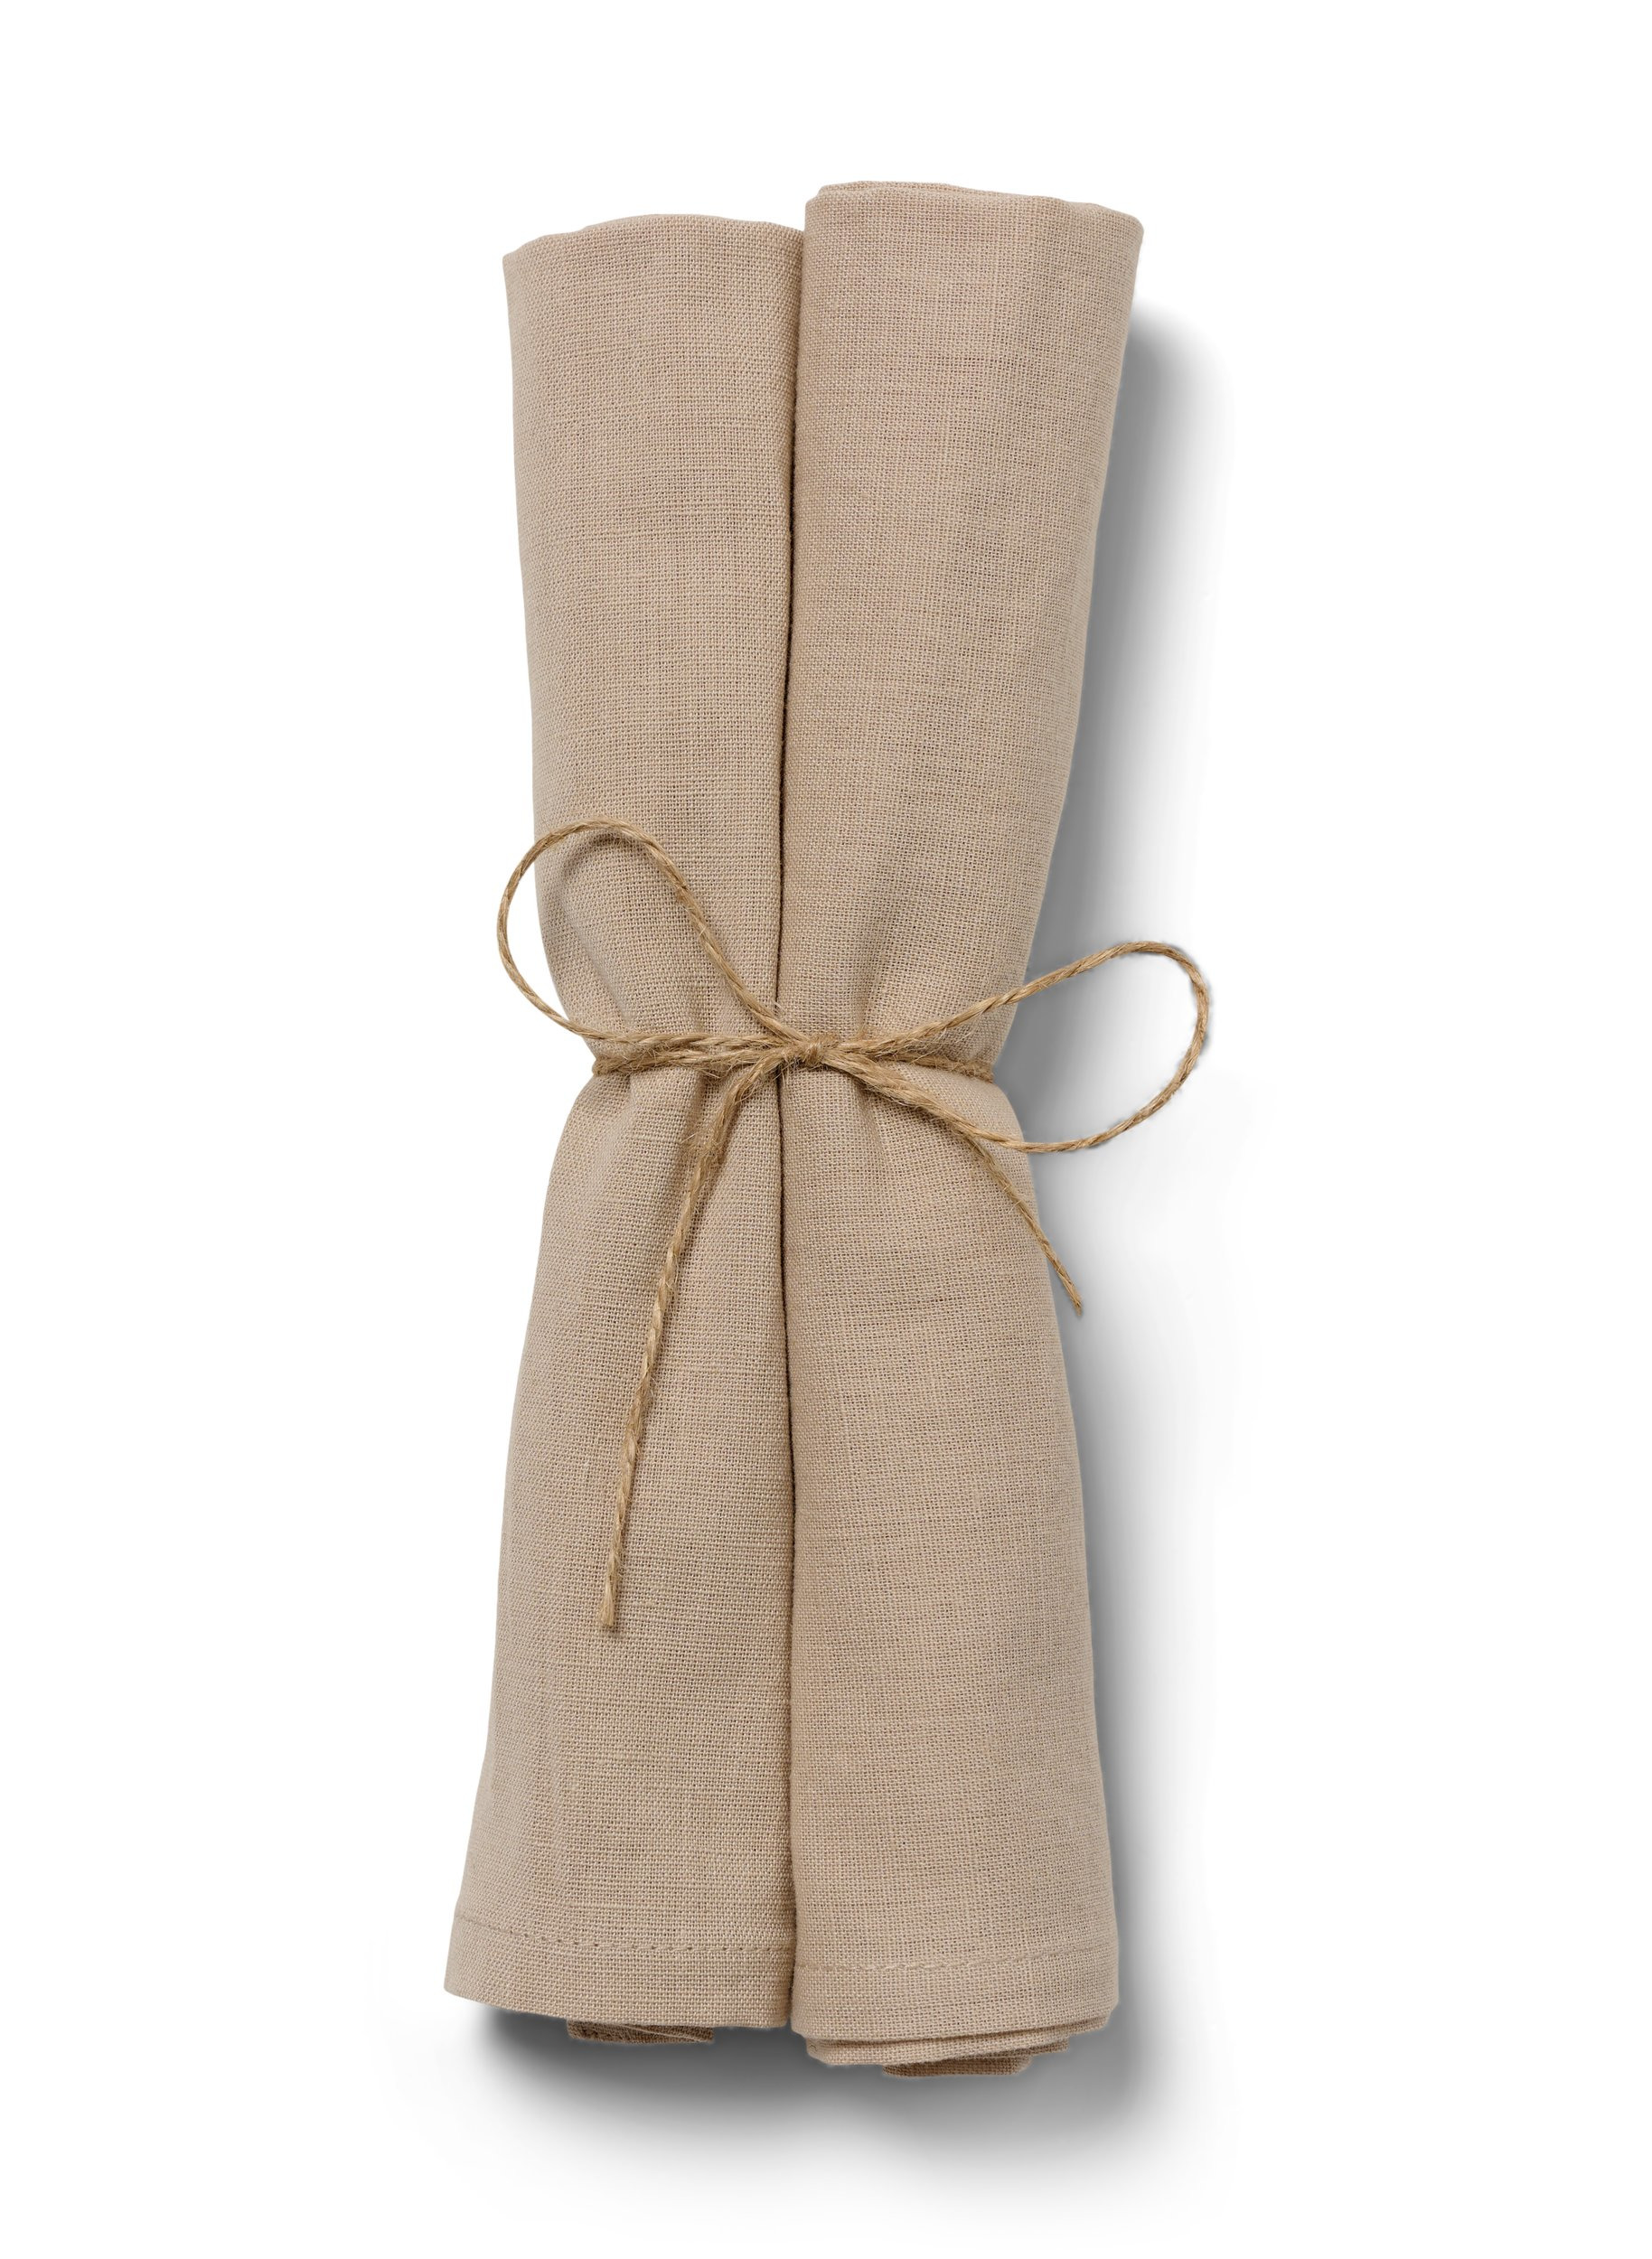 Cotton napkins in a 2-pack, Oxford Tan, Packshot